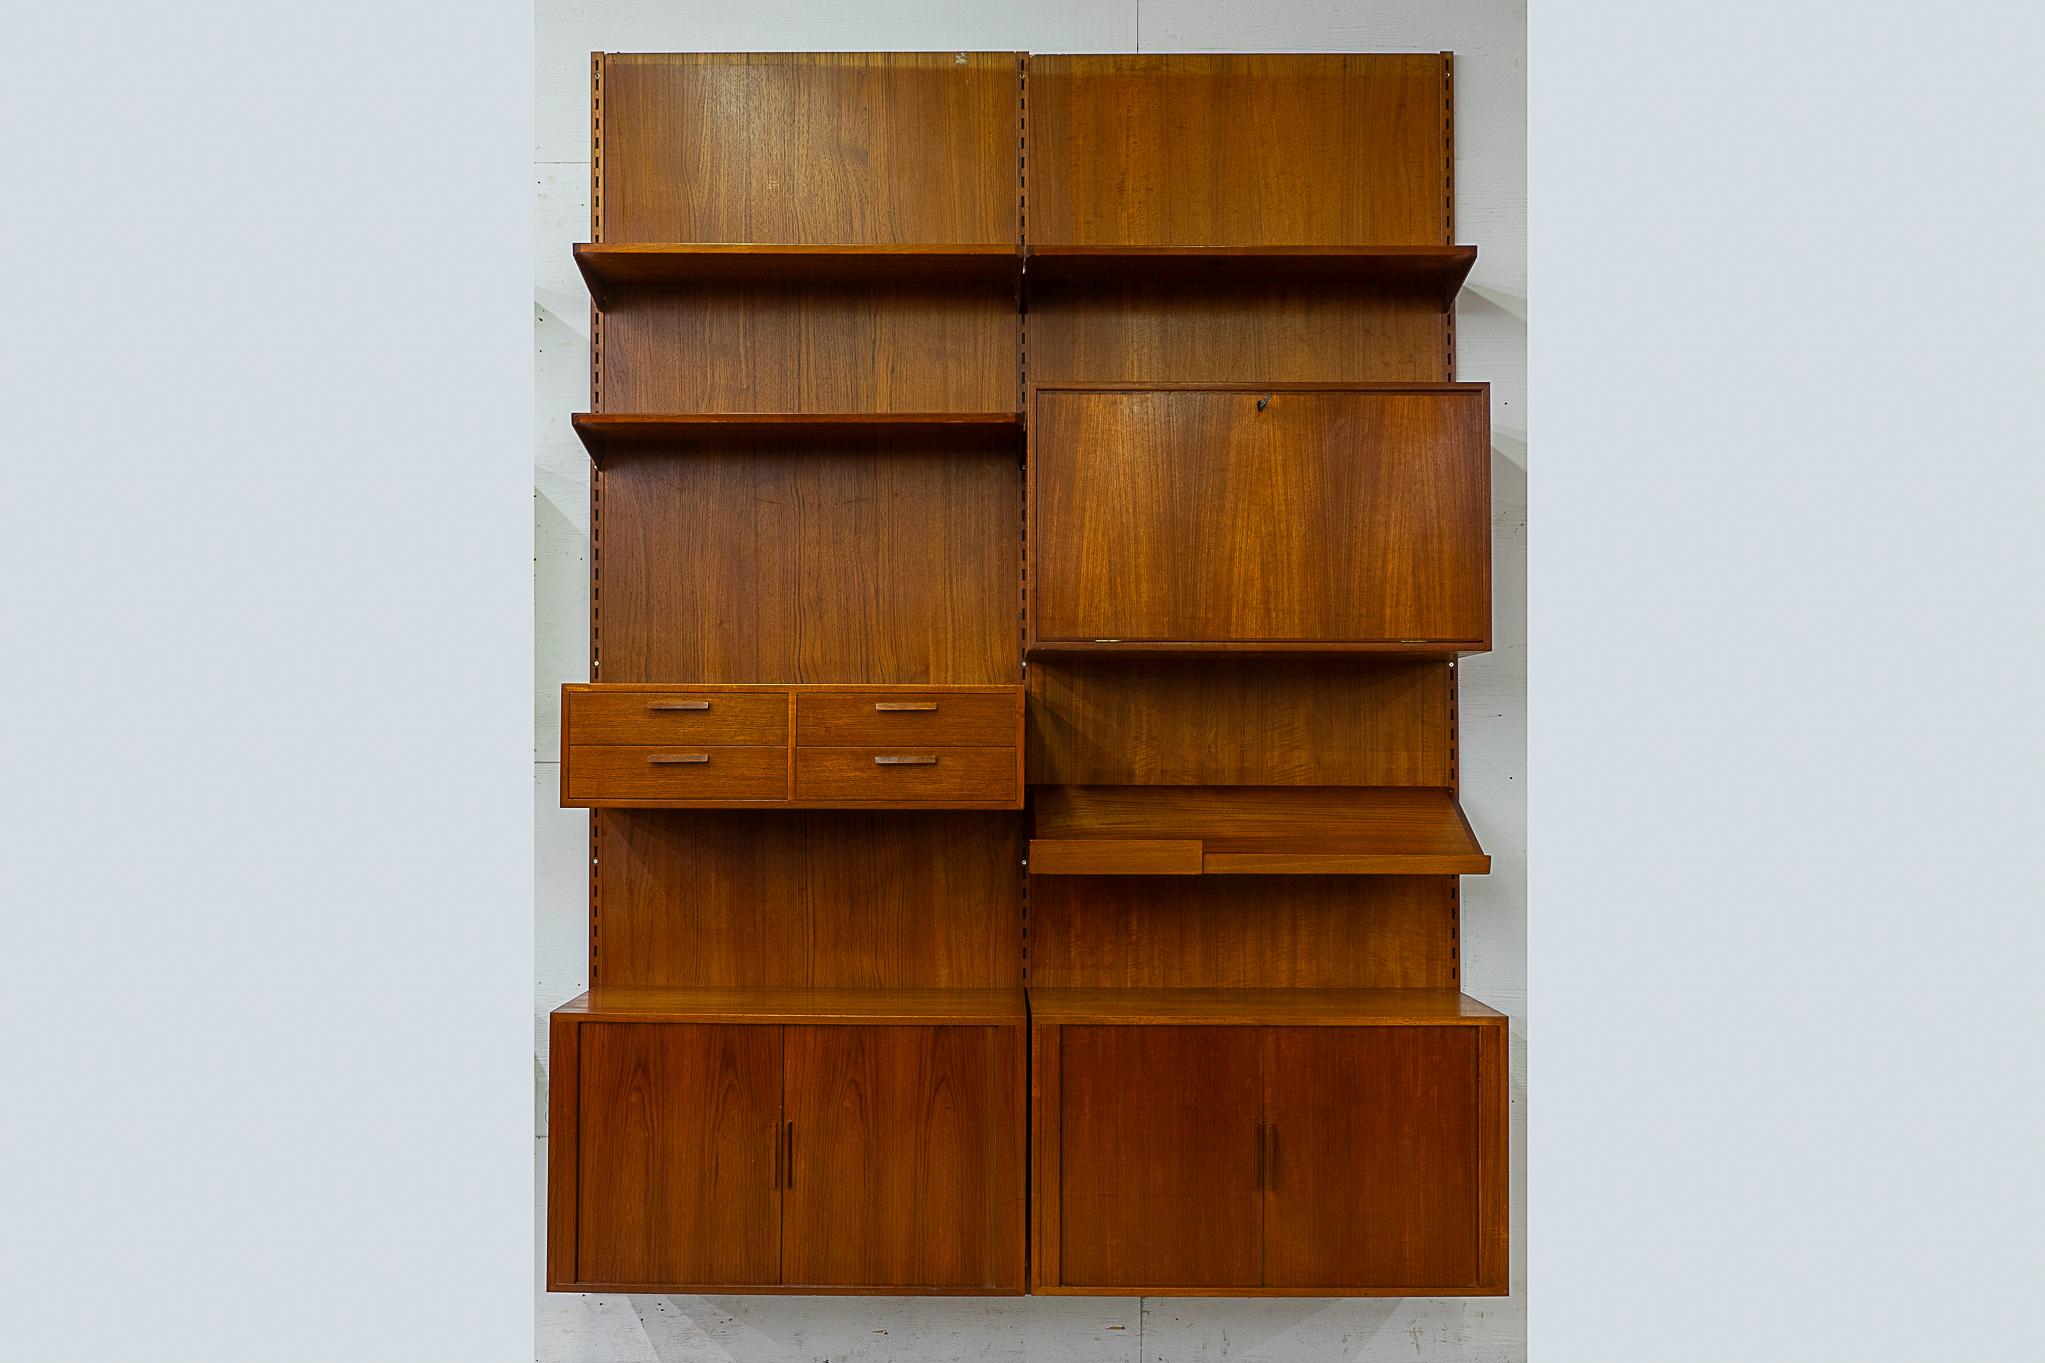 Teak Danish wall system by Kai Kristiansen, circa 1960's. Fantastic double bank wall system with stunning book-matched veneer and dovetail construction. Modular components mount with 3 rails, back panel use is optional. Includes: 2 tambour door